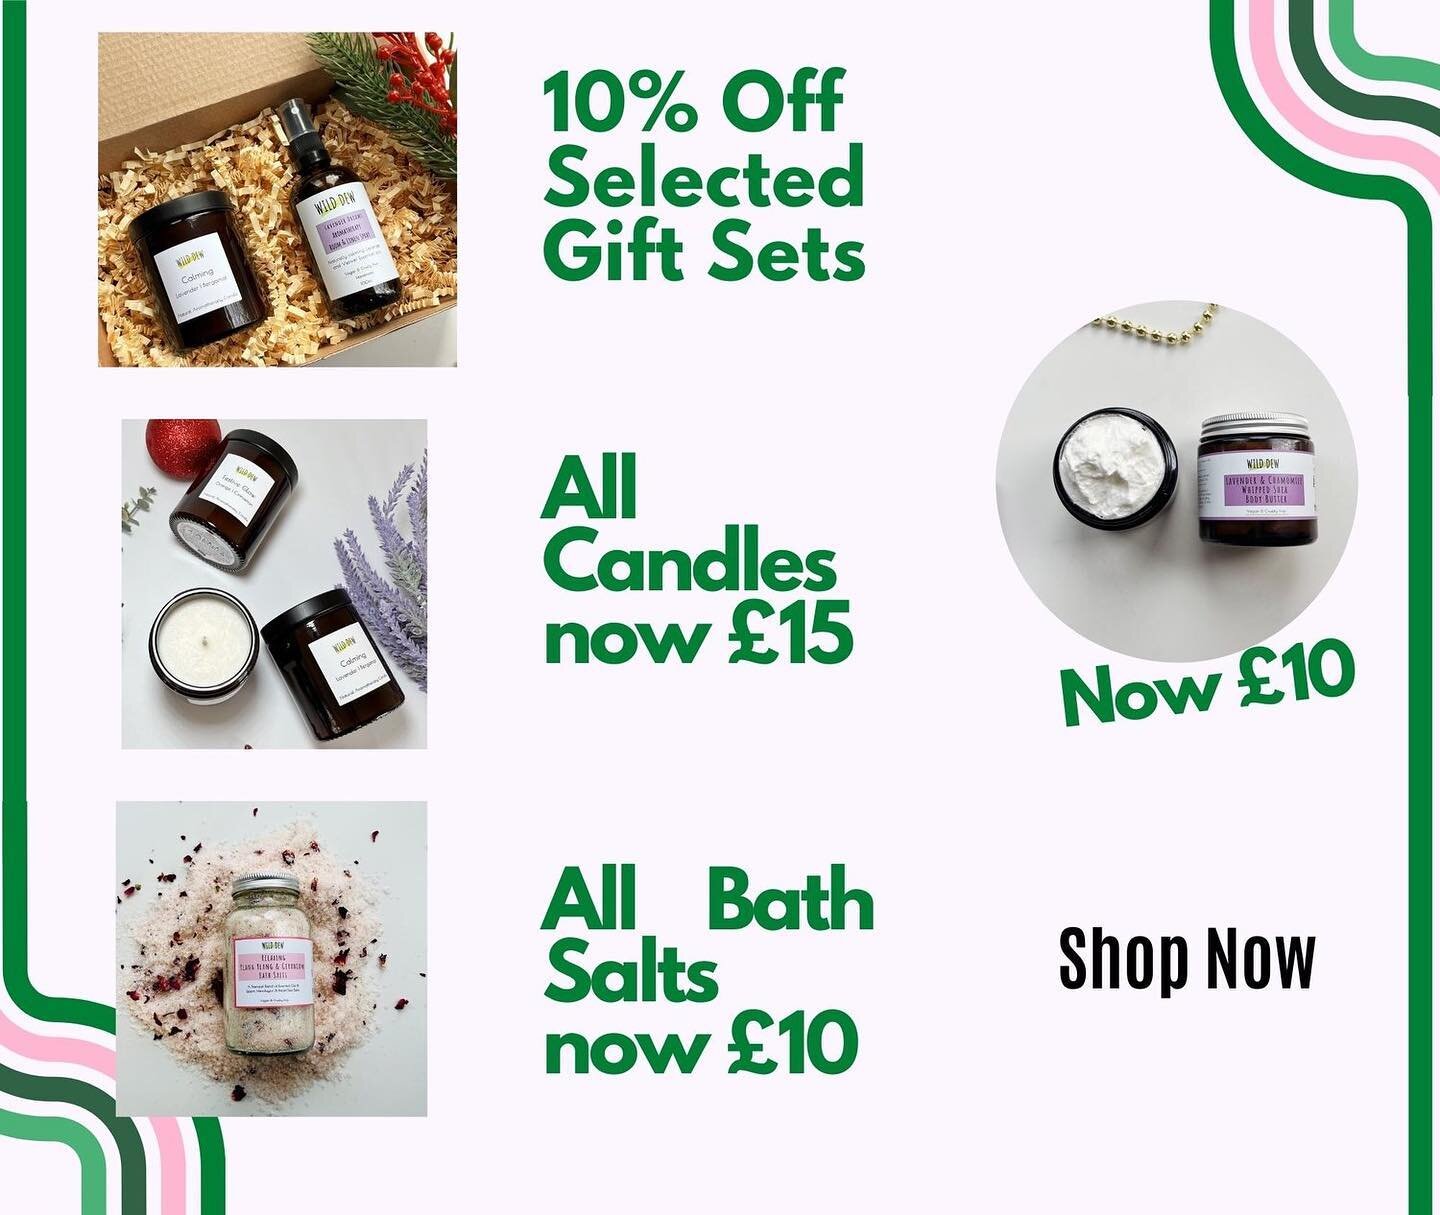 Only 20 days to go until Christmas 🎄and it&rsquo;s not too late to still get that special Self-Care Gift for yourself or loved ones. We&rsquo;ve got:
- 10% Off selected gift sets
- Candles now &pound;15
- All Bath Salts and Whipped Shea Body Butter 